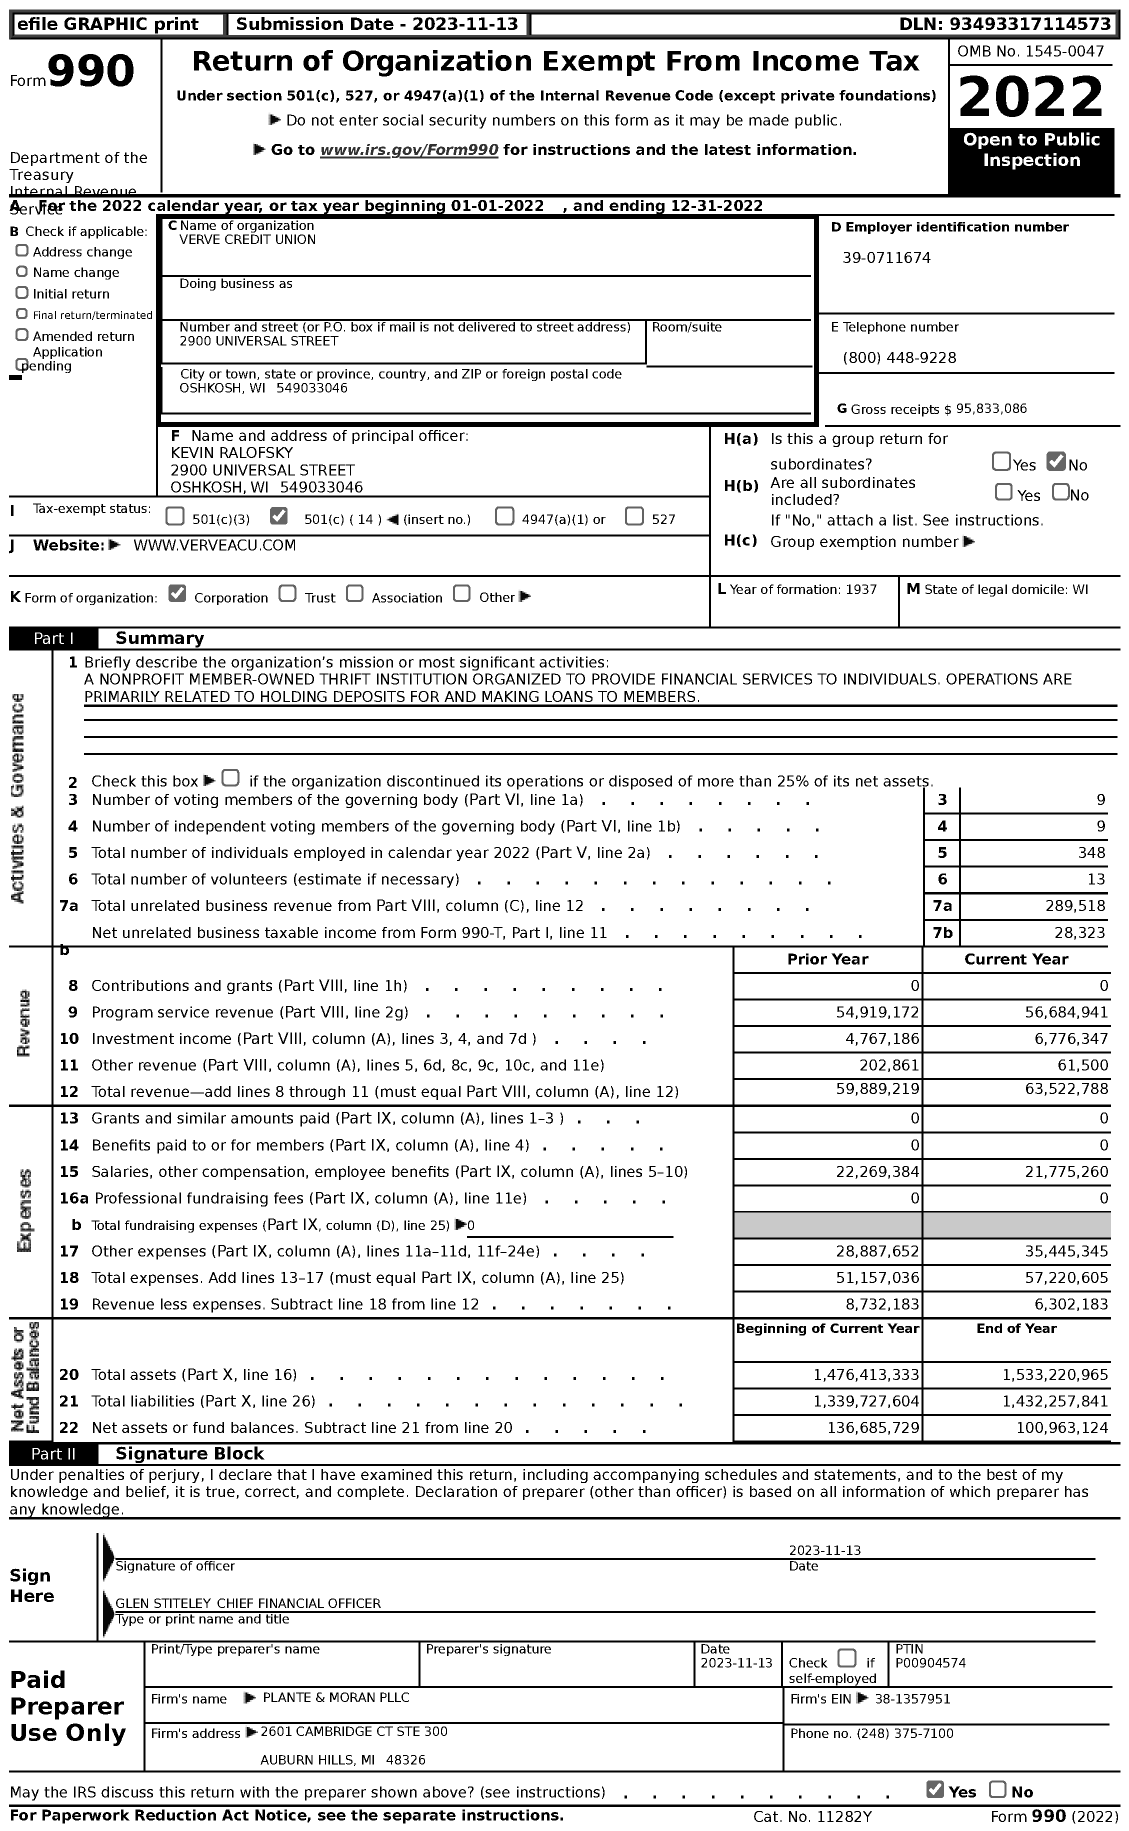 Image of first page of 2022 Form 990 for Verve Credit Union